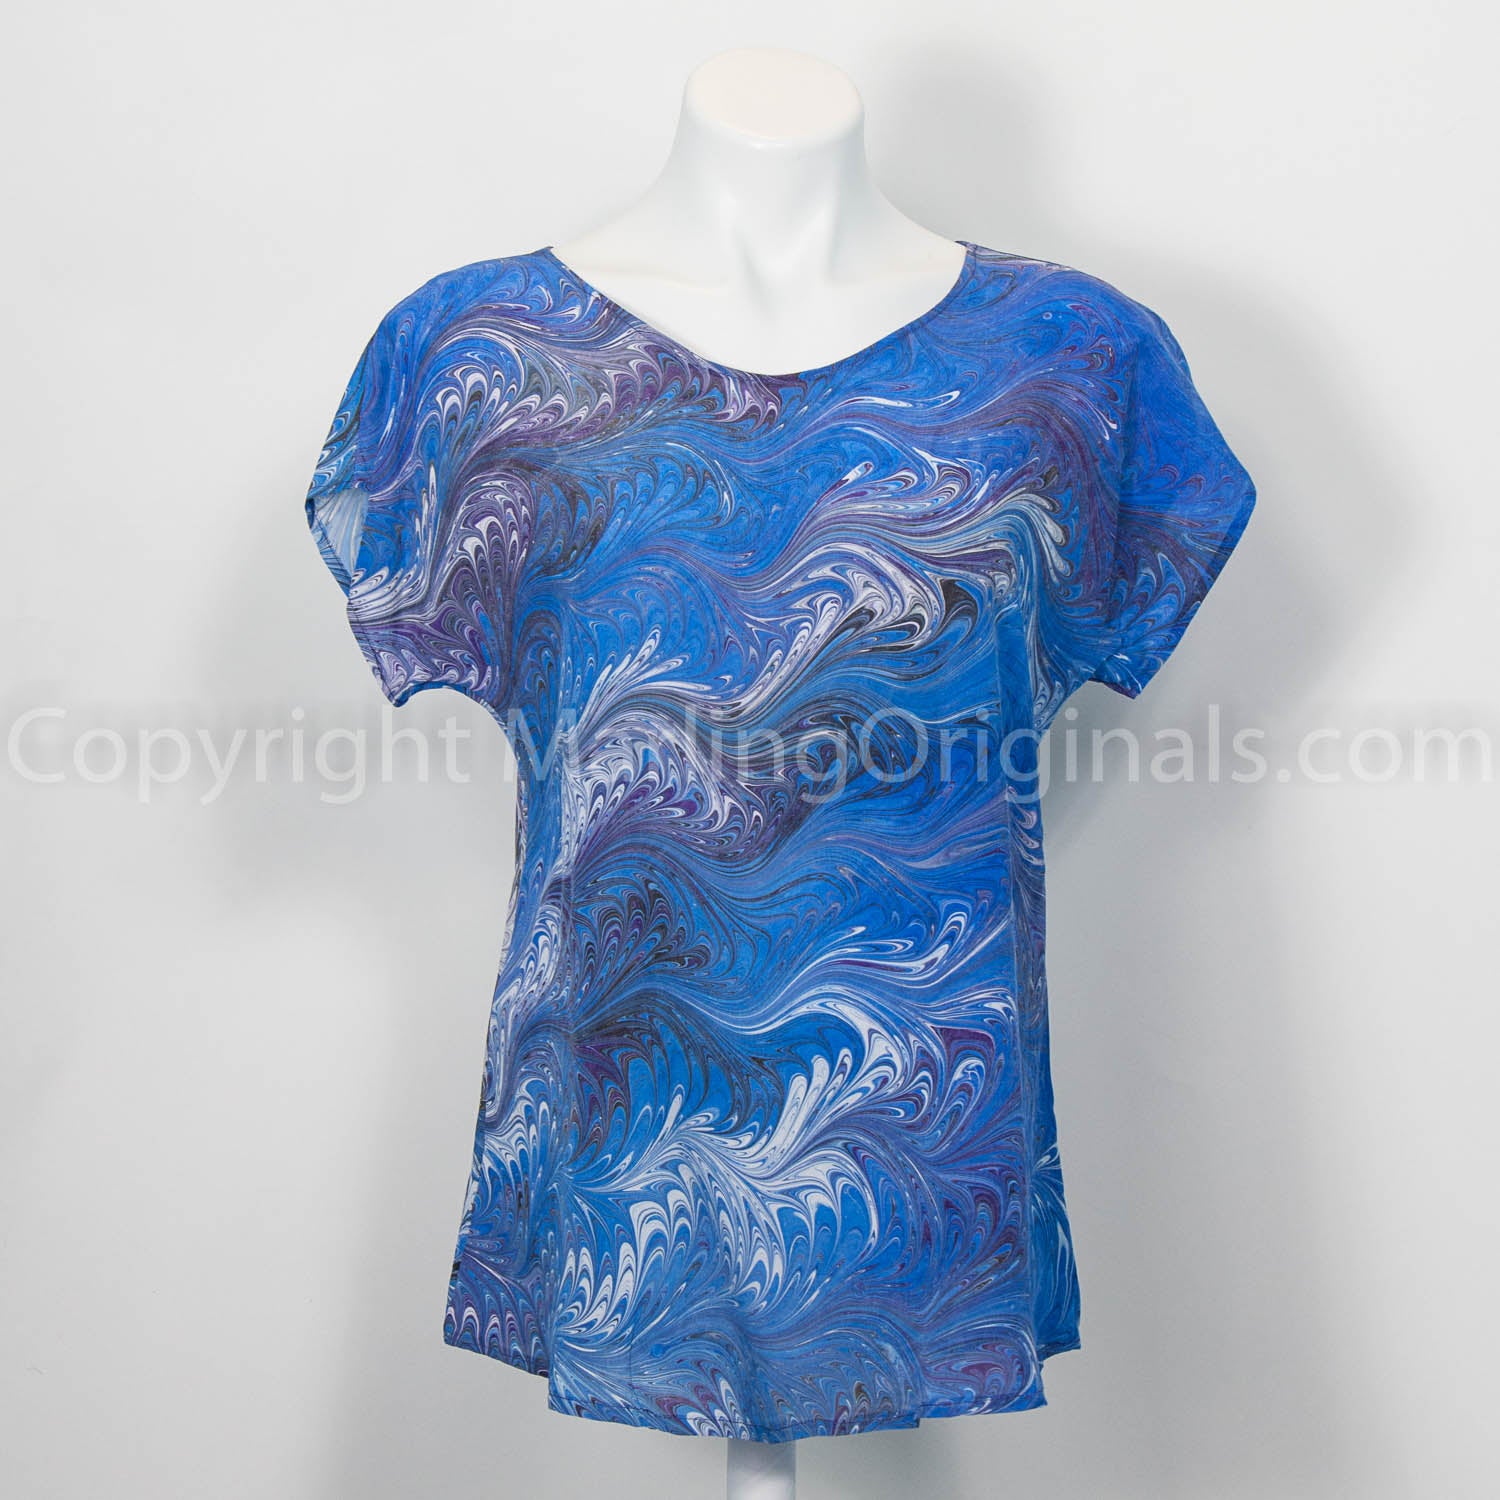 Crepe silk top hand marbled in blue, purple, white and black.  Gorgeous feathering. Short sleeve.